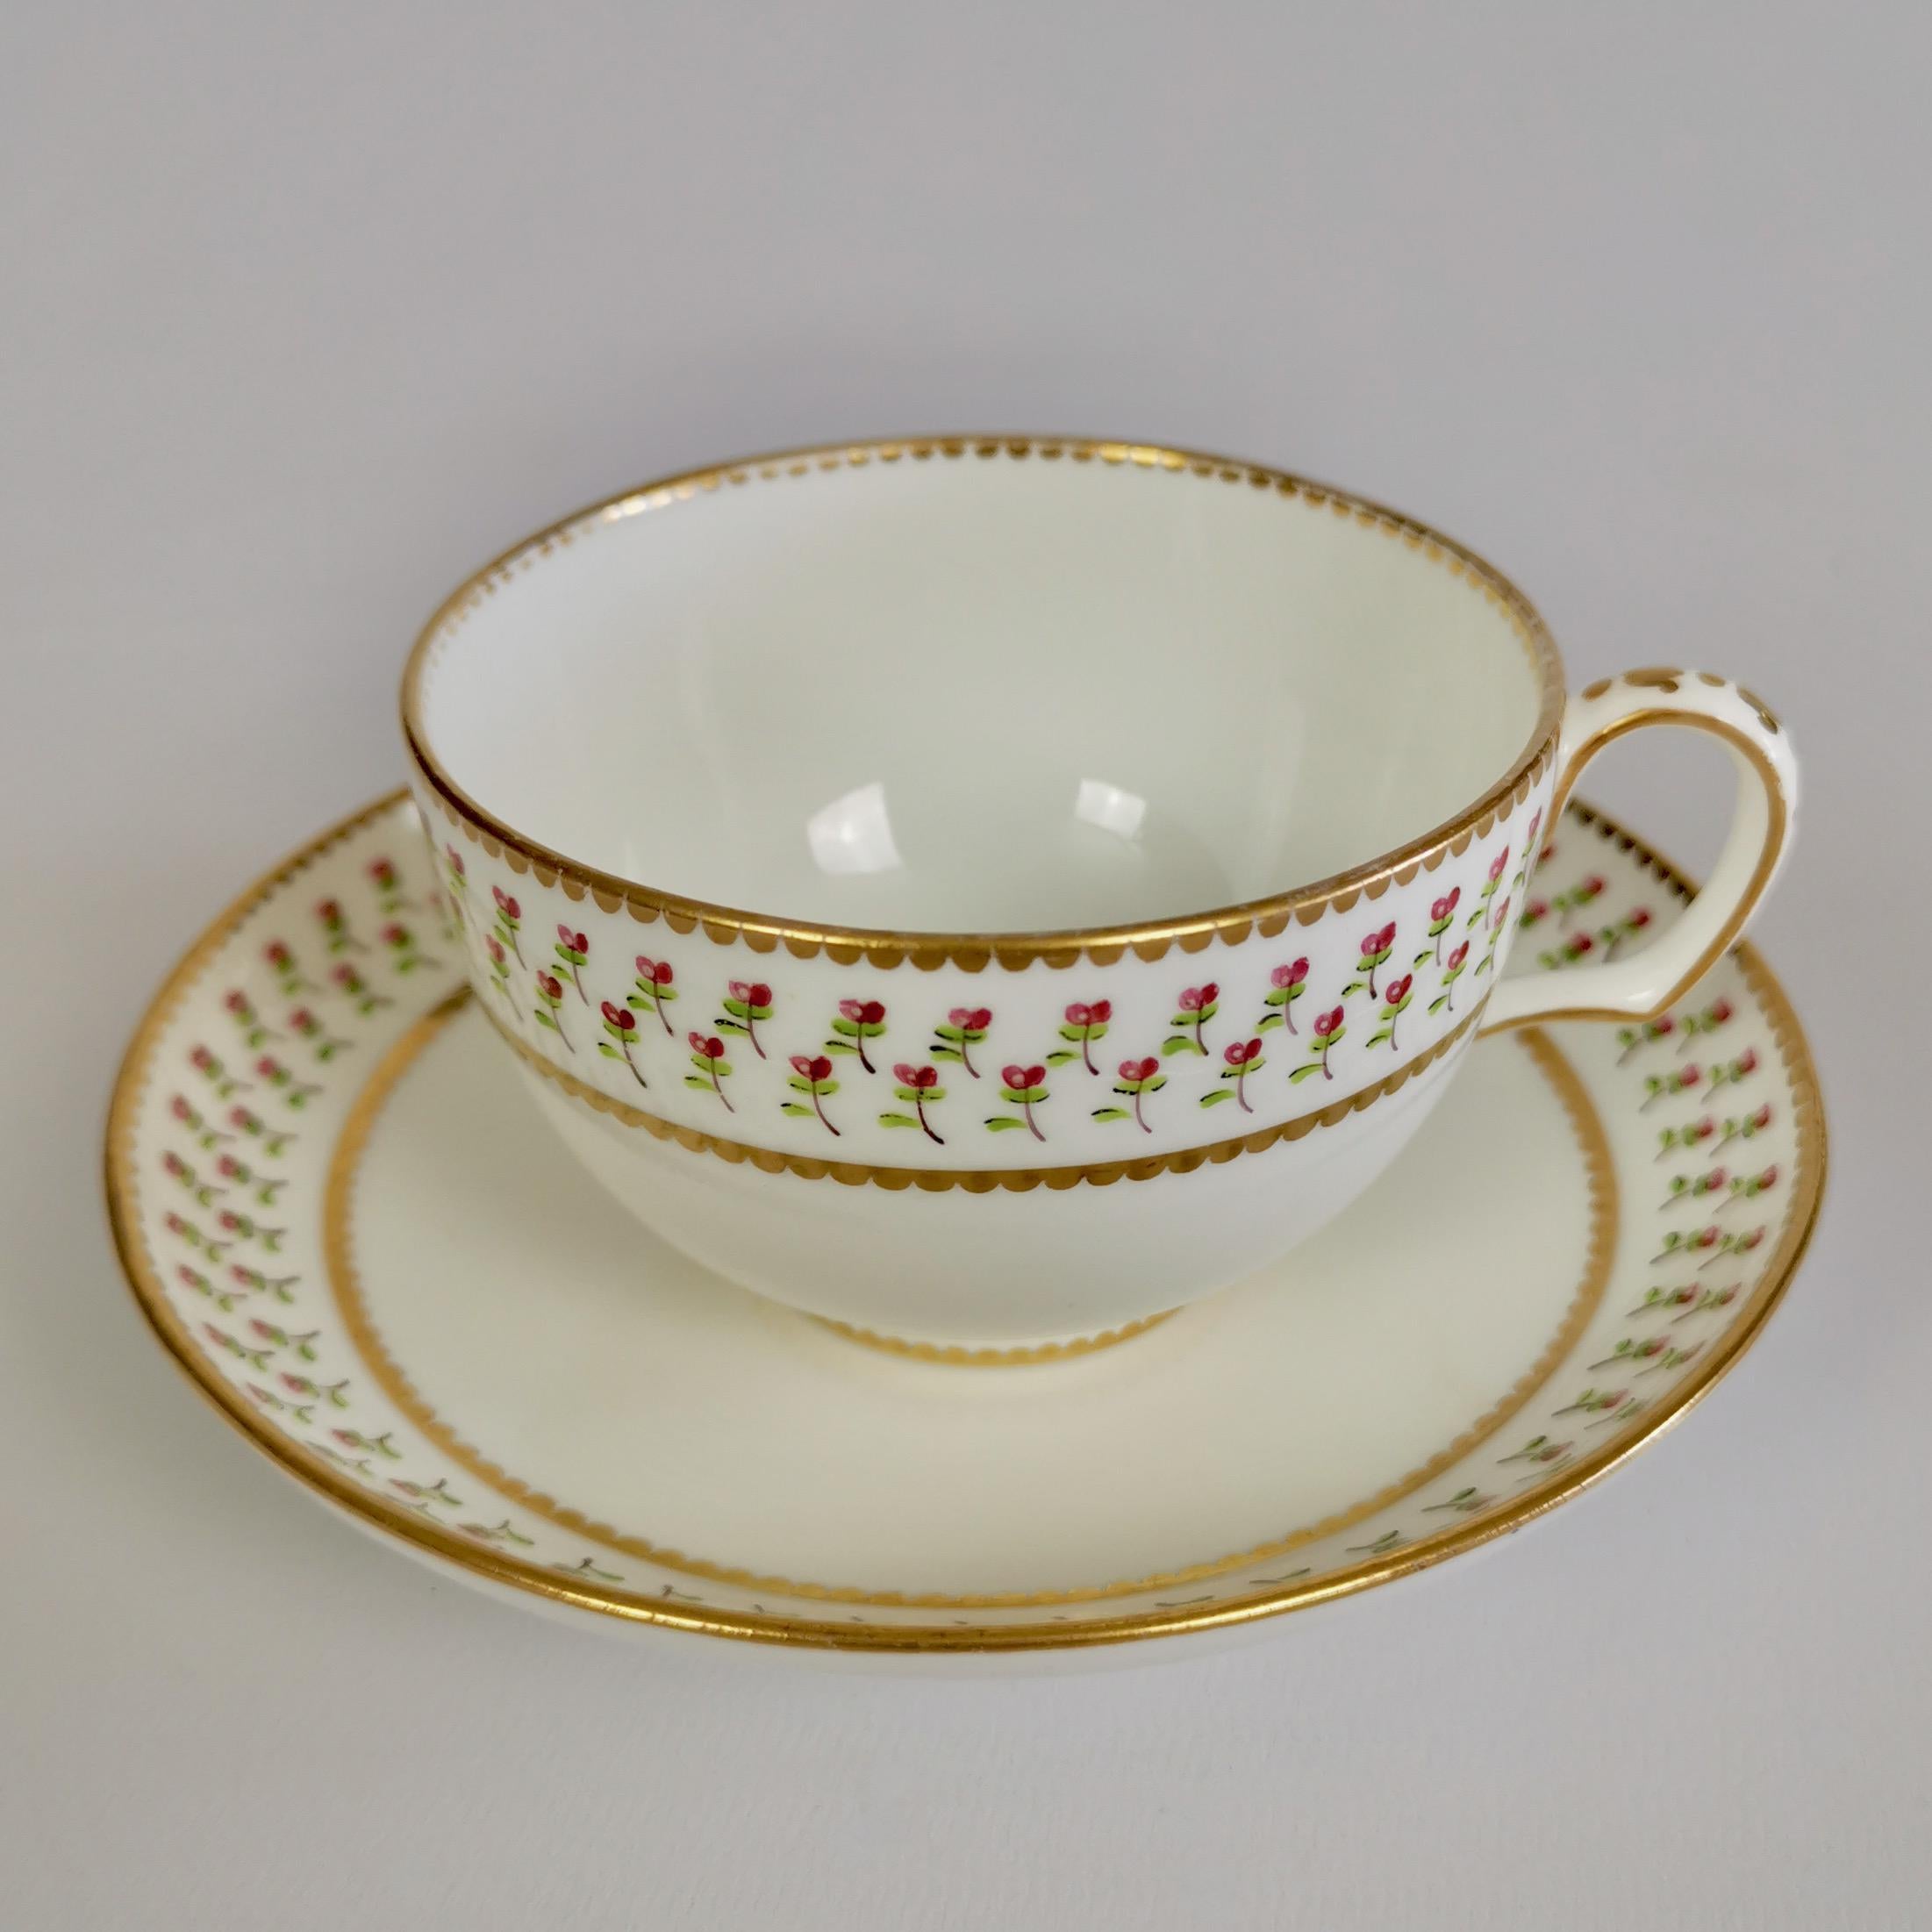 Victorian Derby King Street Set of 6 Porcelain Tea Trios, White with Tiny Roses, 1848-1862